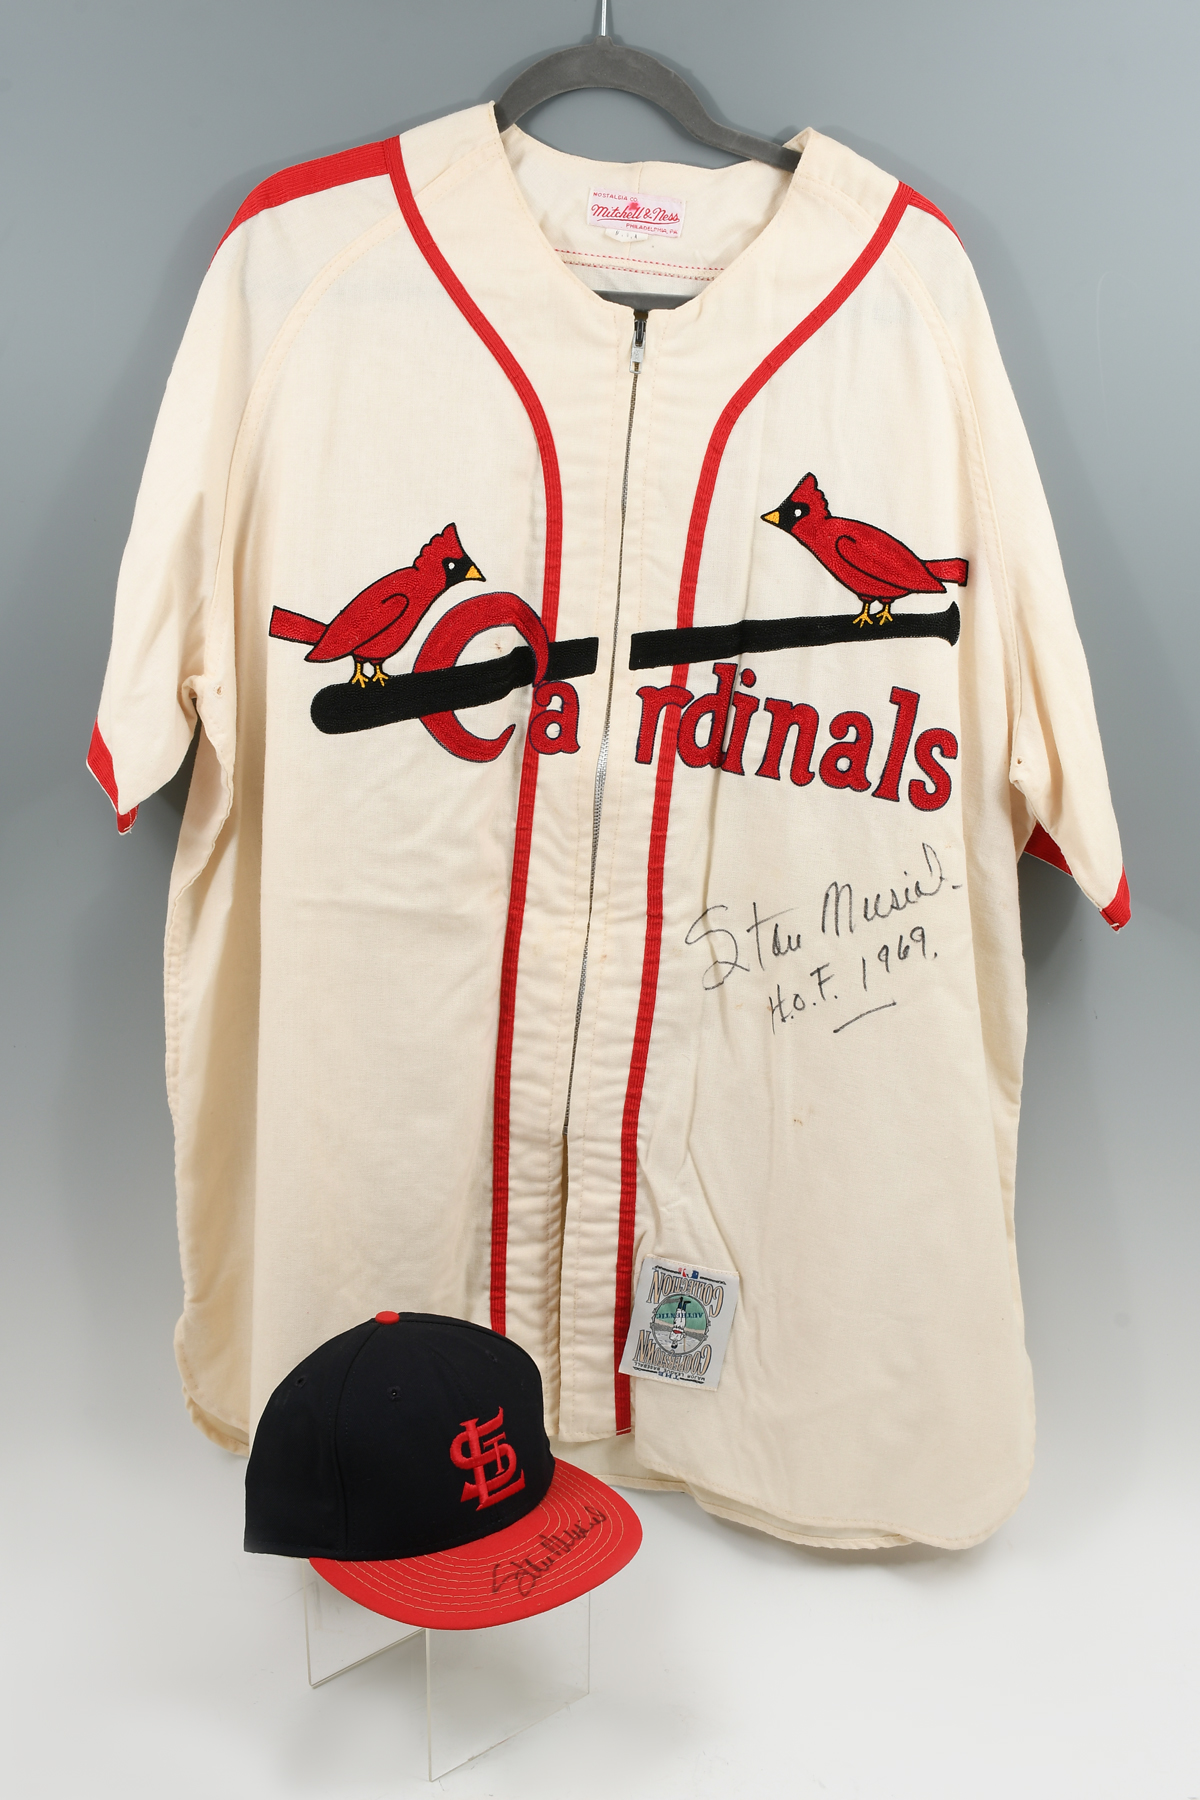 STAN MUSIAL AUTOGRAPHED JERSEY 36a97e